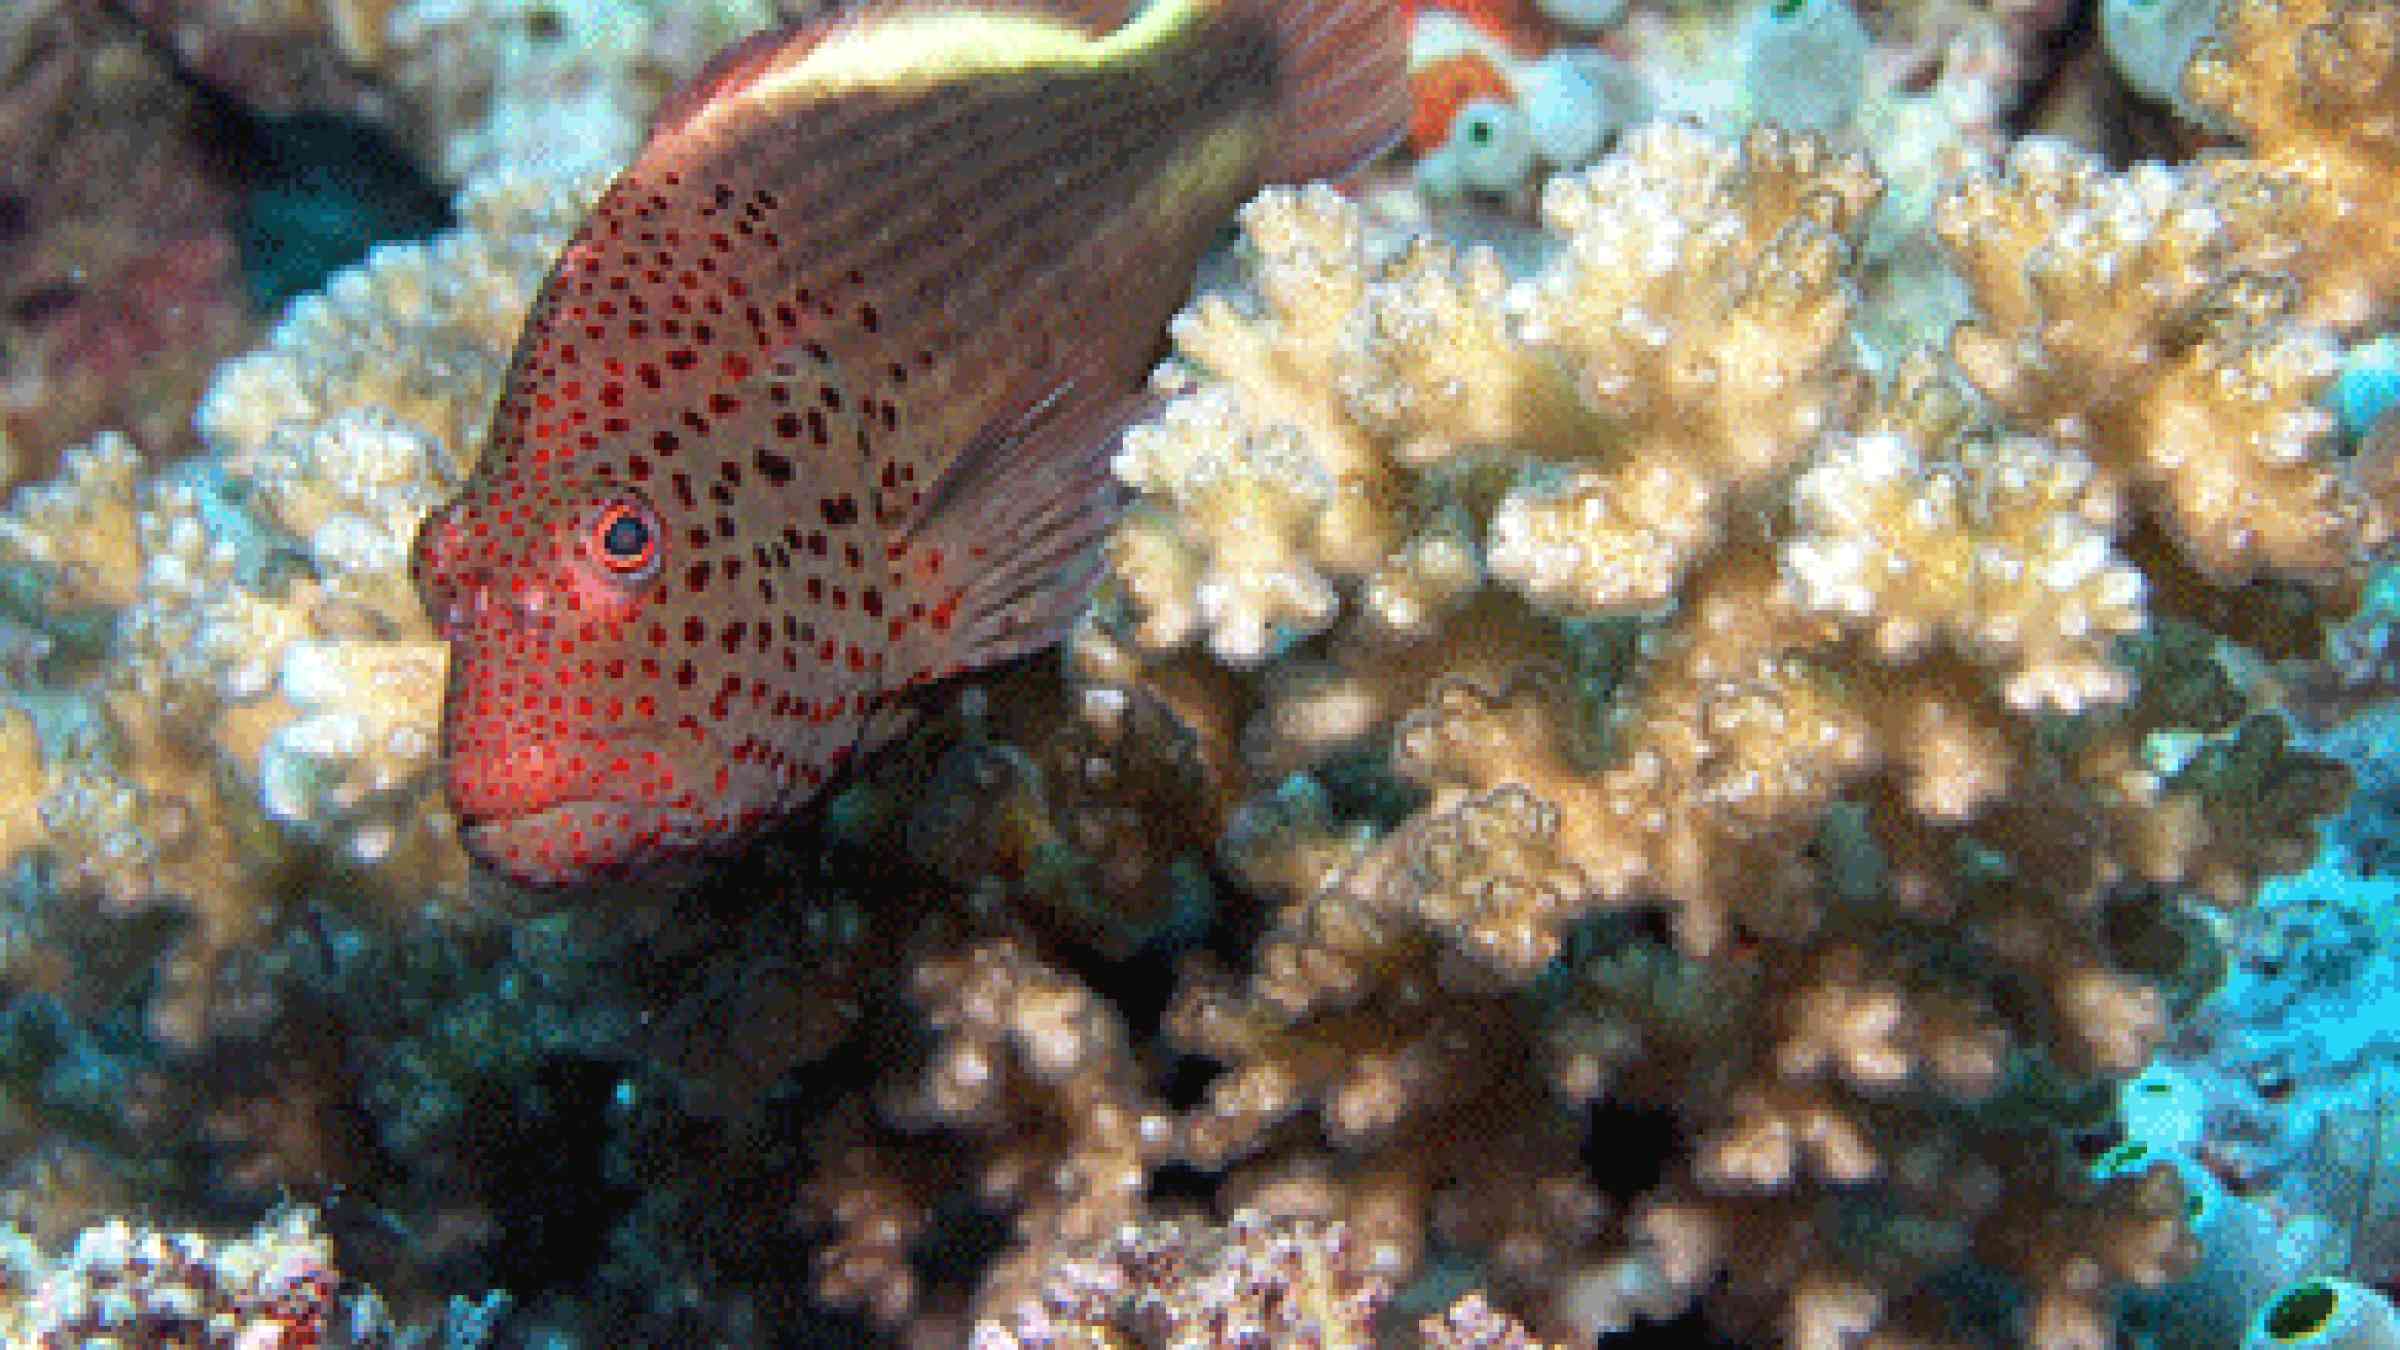 Freckled hawkfish (Paracirrhites forsteri)  Image ID: reef4403, NOAA's Coral Kingdom Collection  Location: Fiji  Photo Date: 2008  Photographer: Julie Bedford, NOAA PA, CC BY 2.0, http://www.flickr.com/photos/51647007